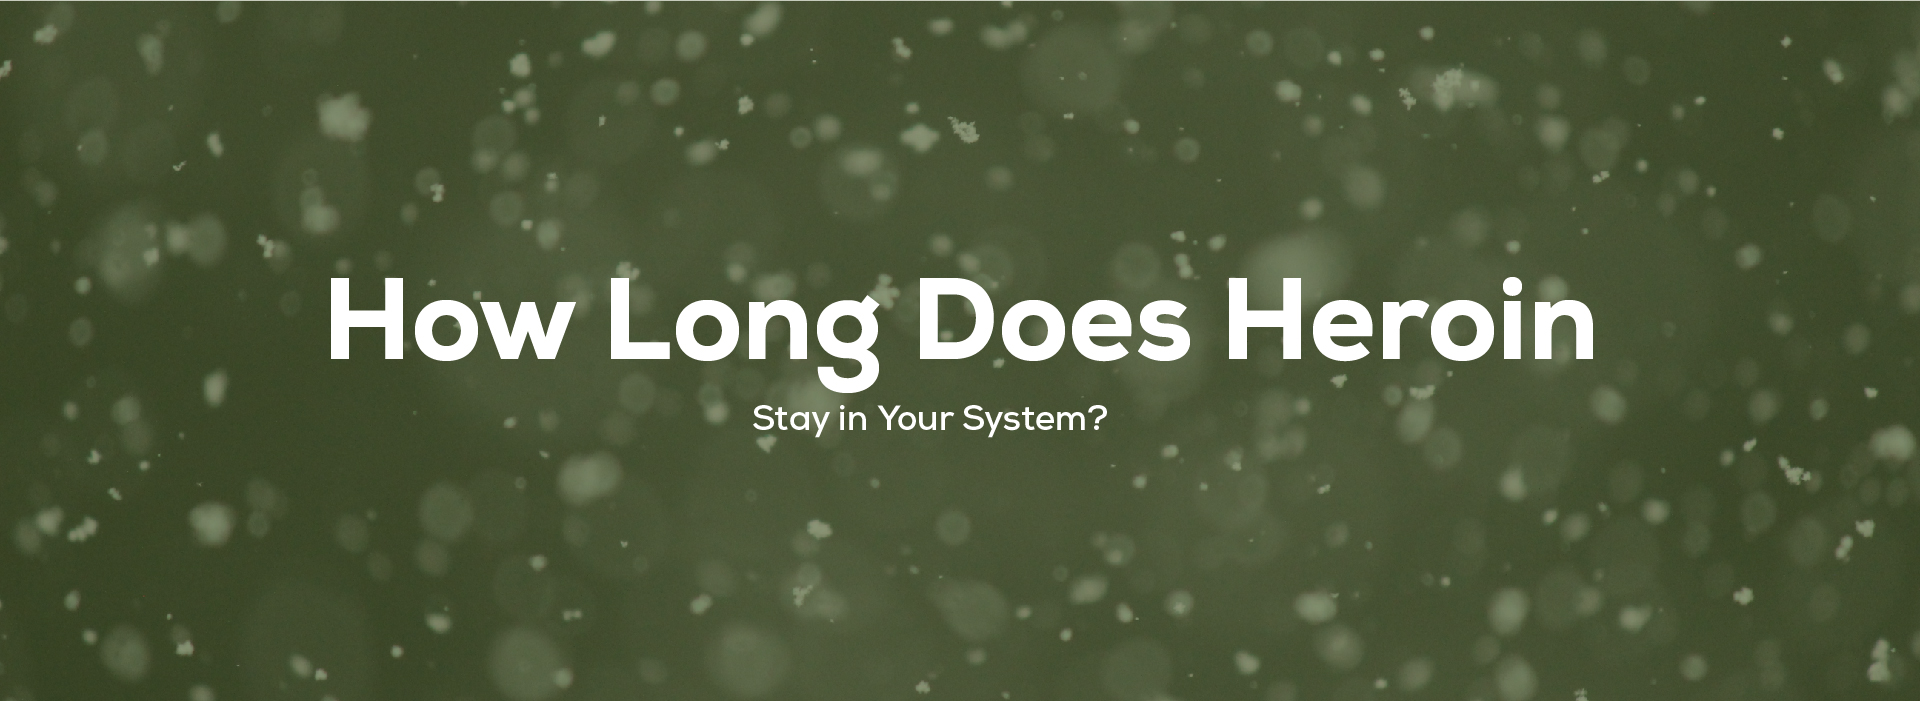 How long does heroin stay in your system?